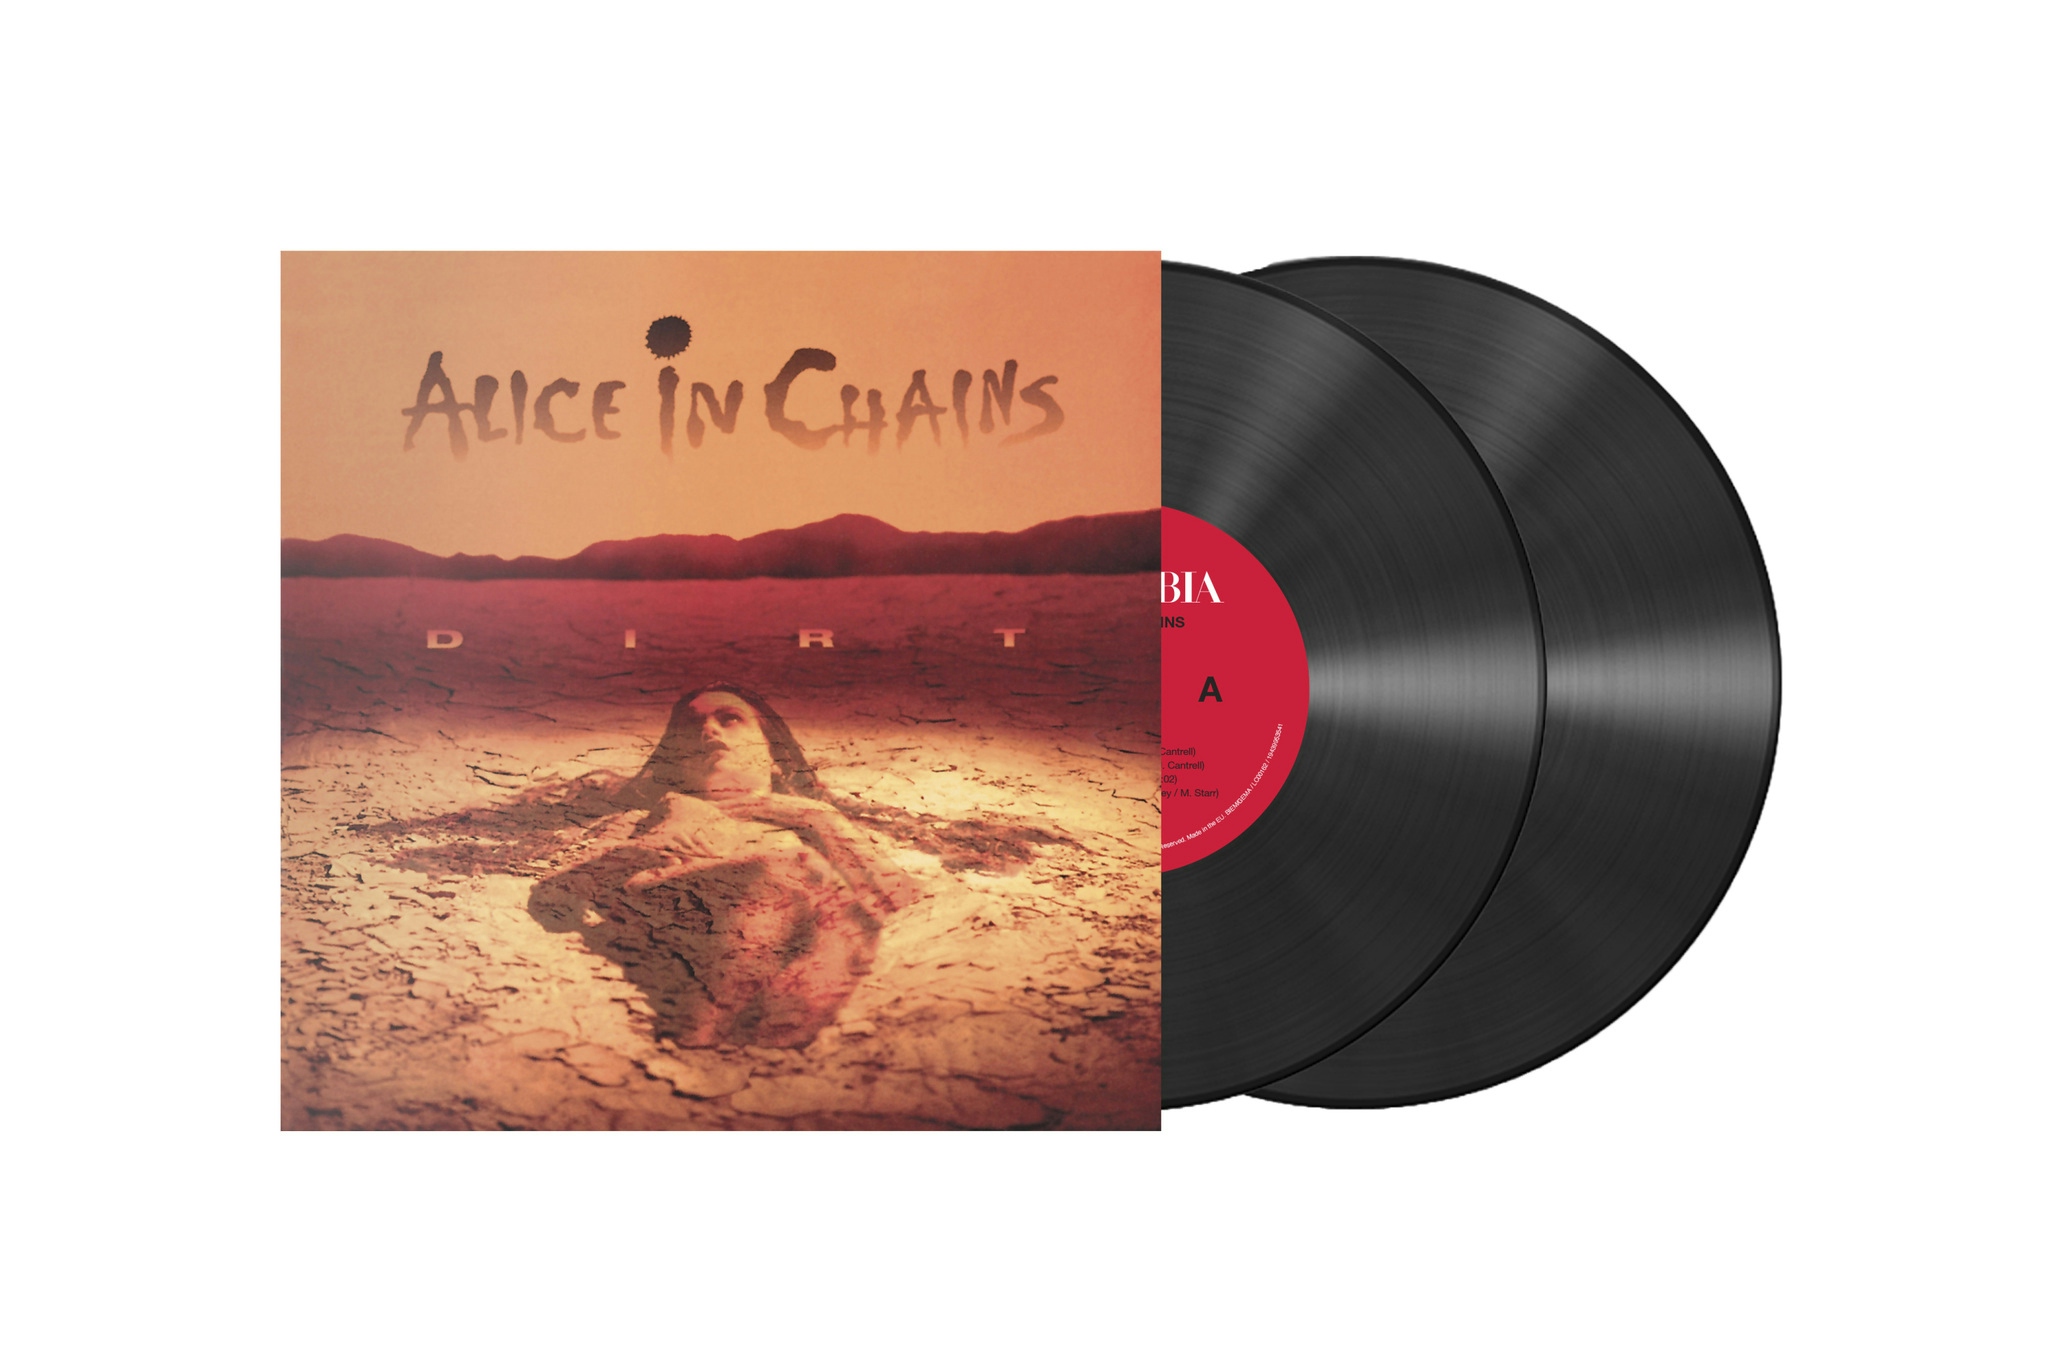 Album artwork for Album artwork for Dirt by Alice In Chains by Dirt - Alice In Chains